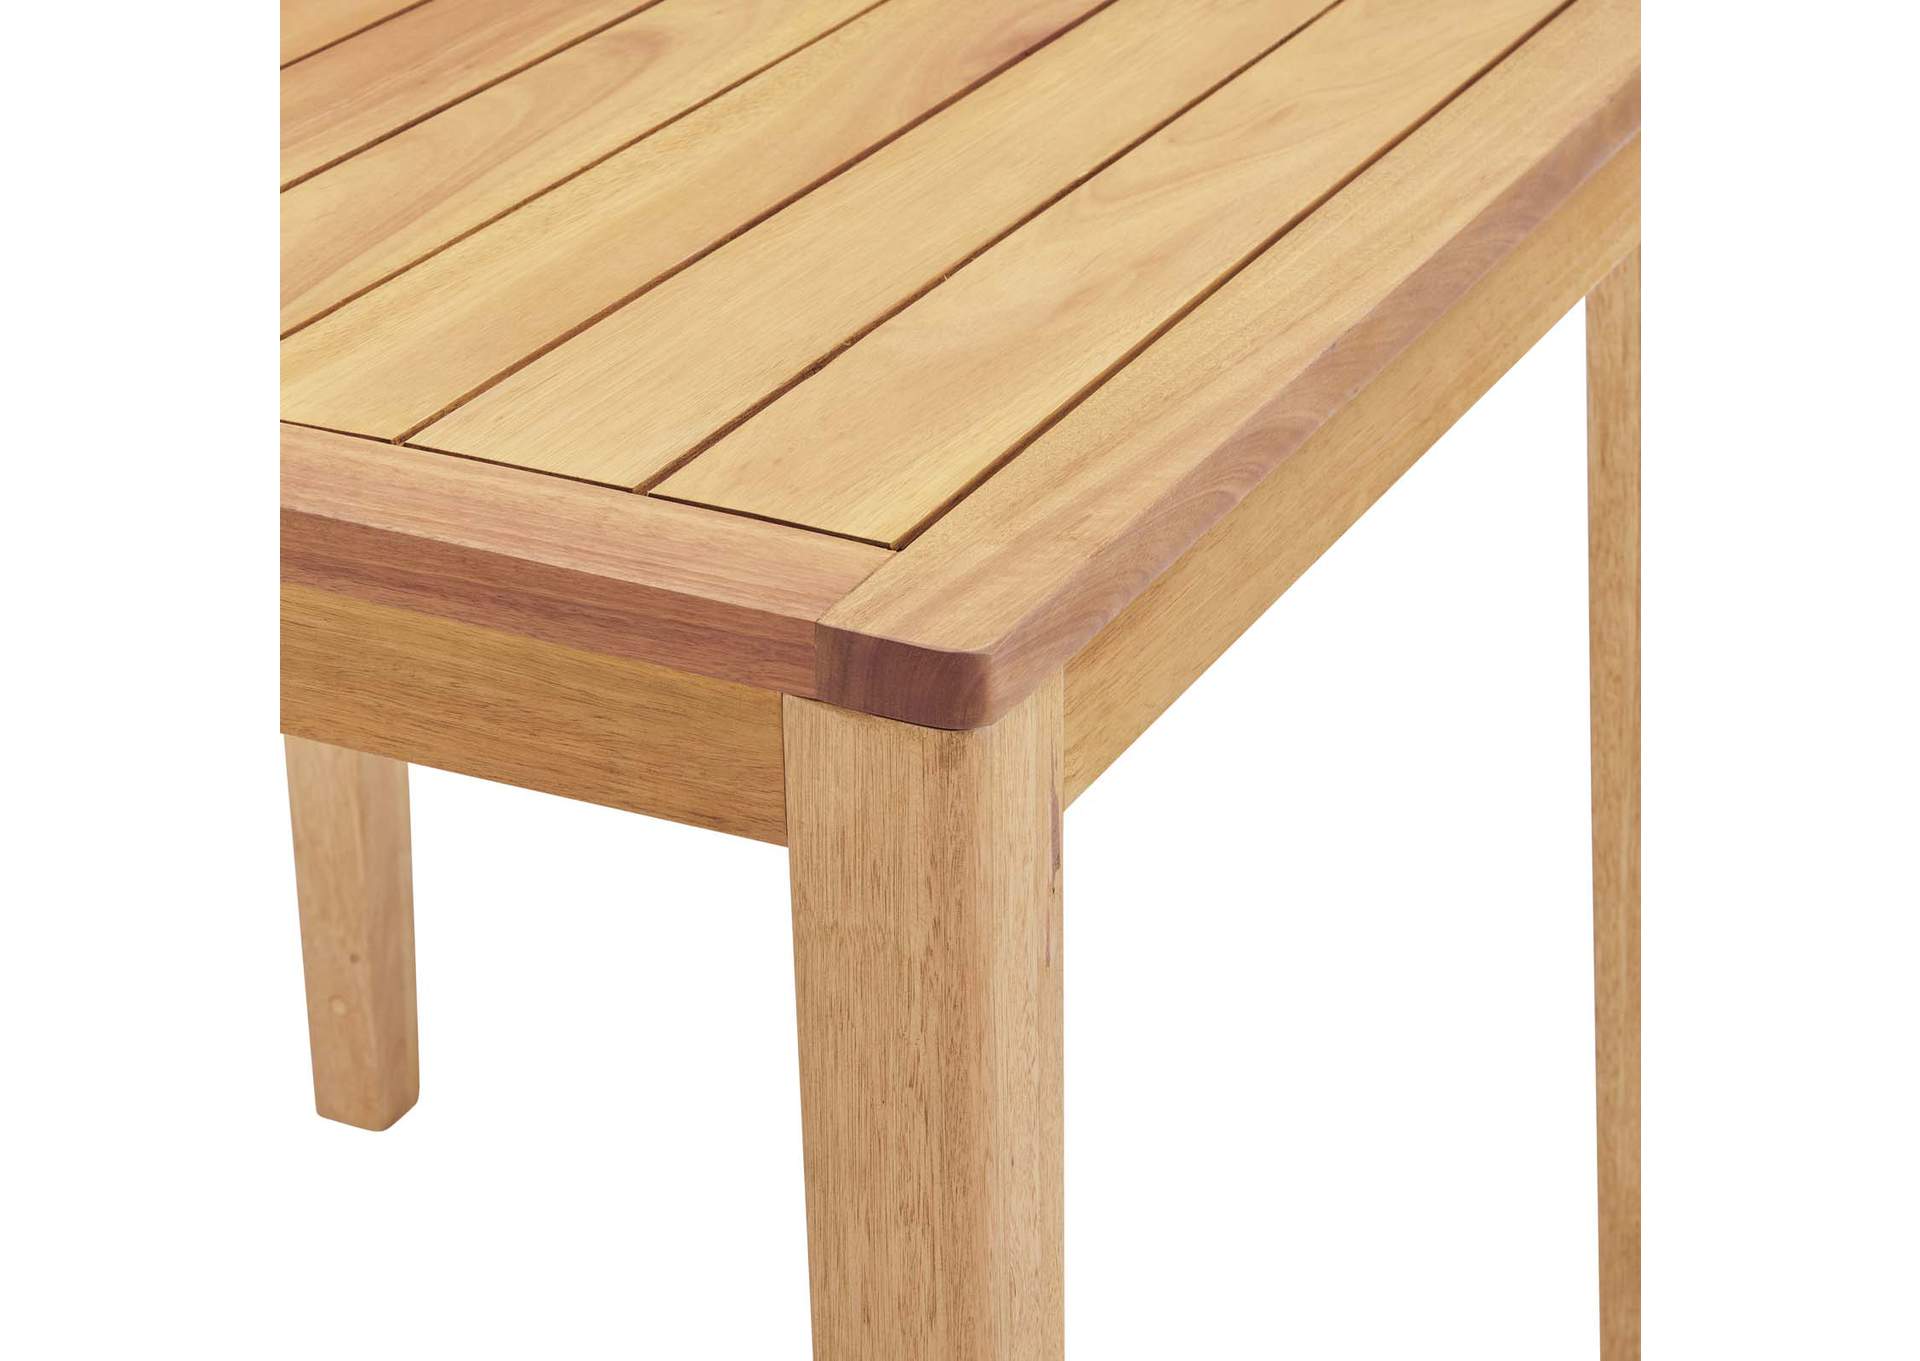 Natural Portsmouth Karri Wood Outdoor Patio Bar Table,Modway